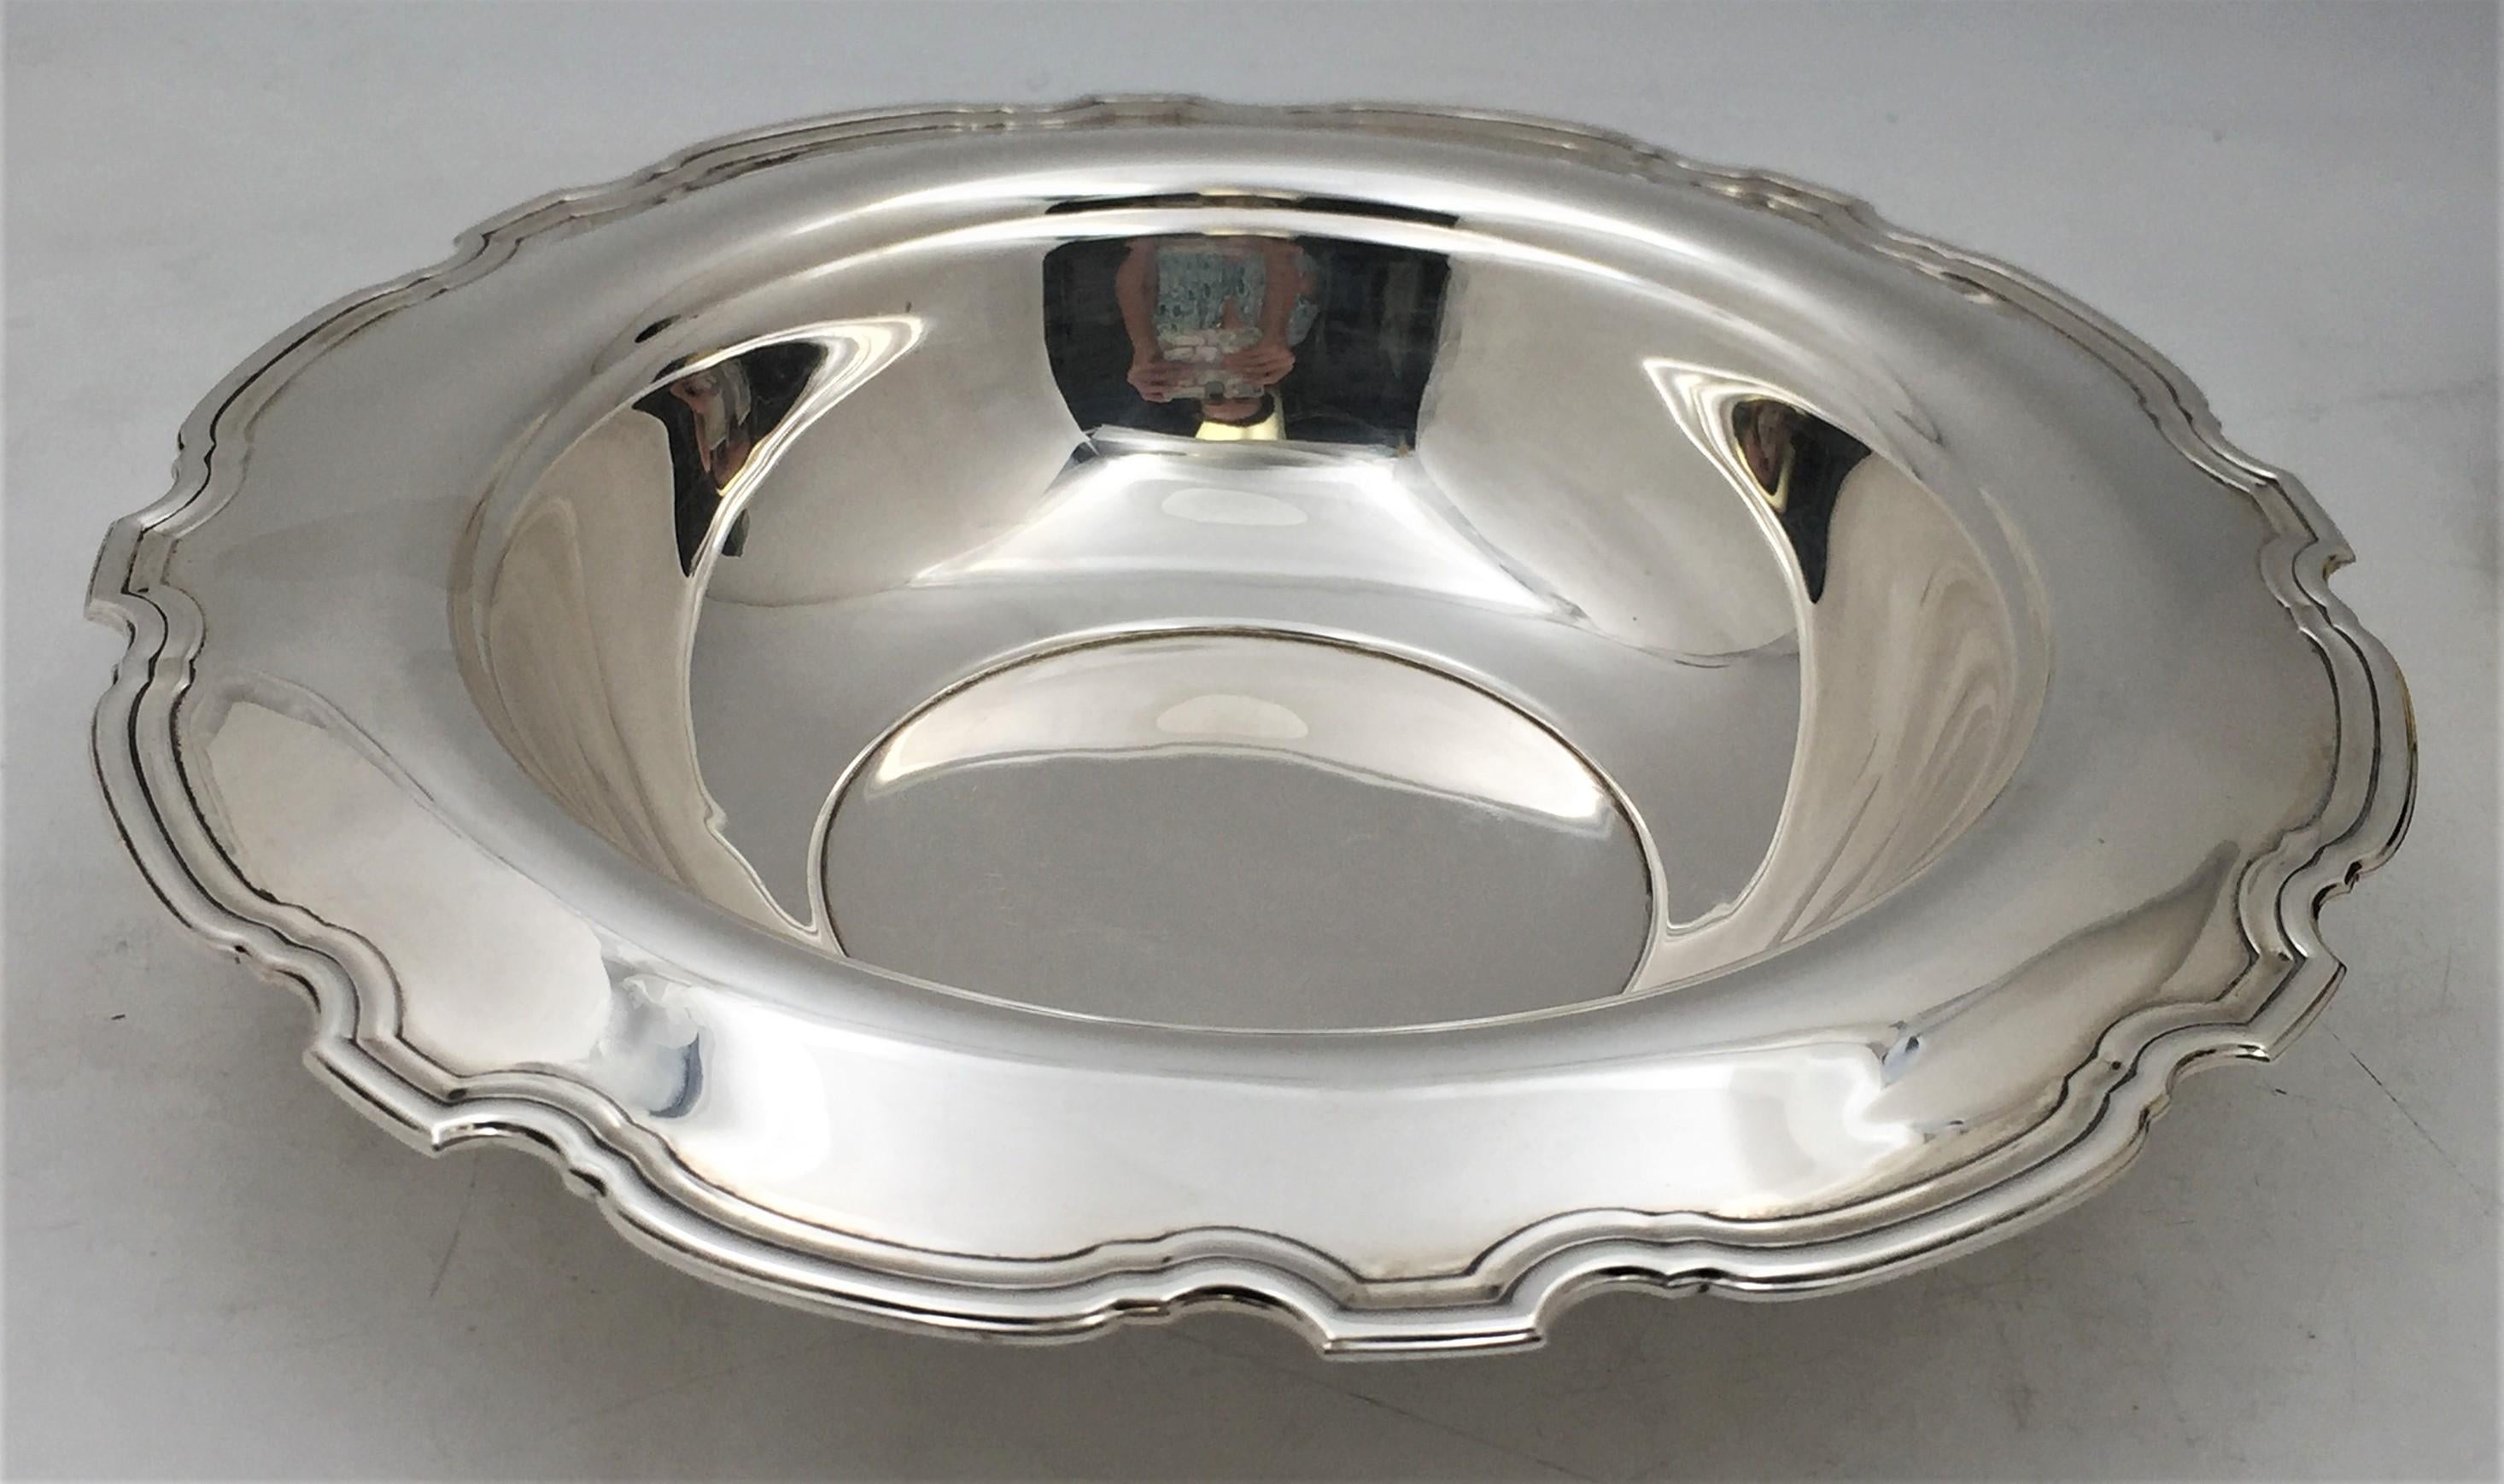 Large sterling silver centerpiece bowl in the Hampton pattern, made by Tiffany & Co. in 1925. The diameter is 12